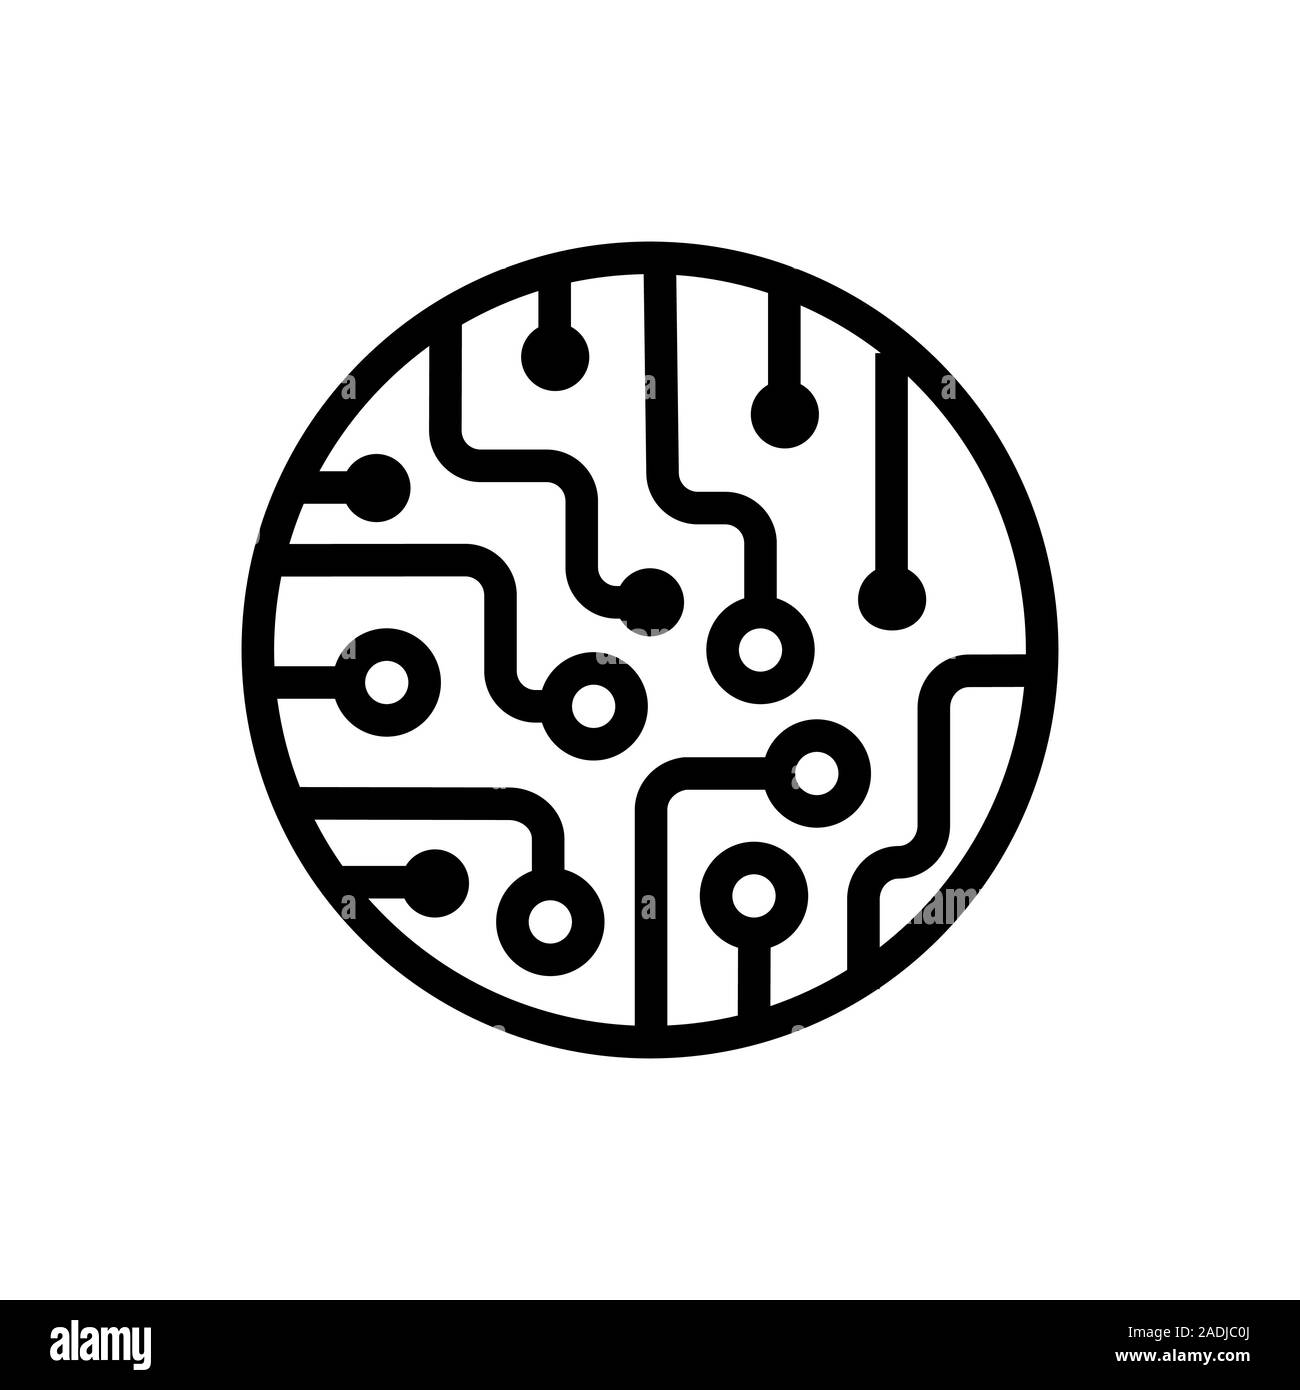 Circuit board icon in flat style Black chip symbol Stock Vector